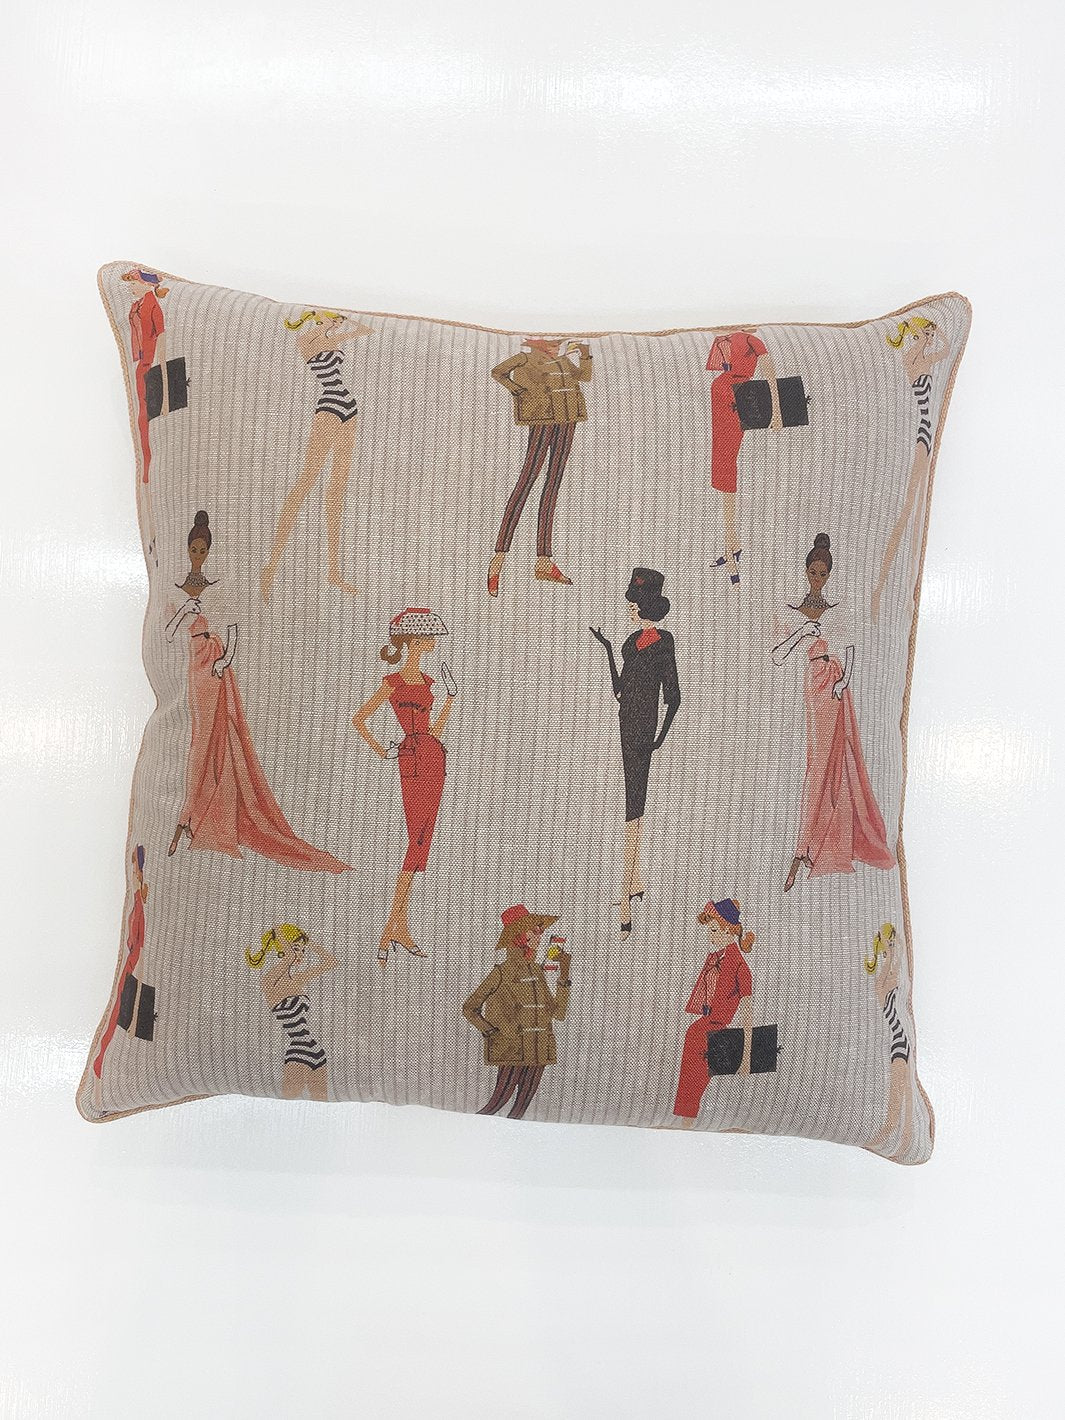 'Vintage Pinstripe' Throw Pillow by Barbie™ - Sand on Flax Linen